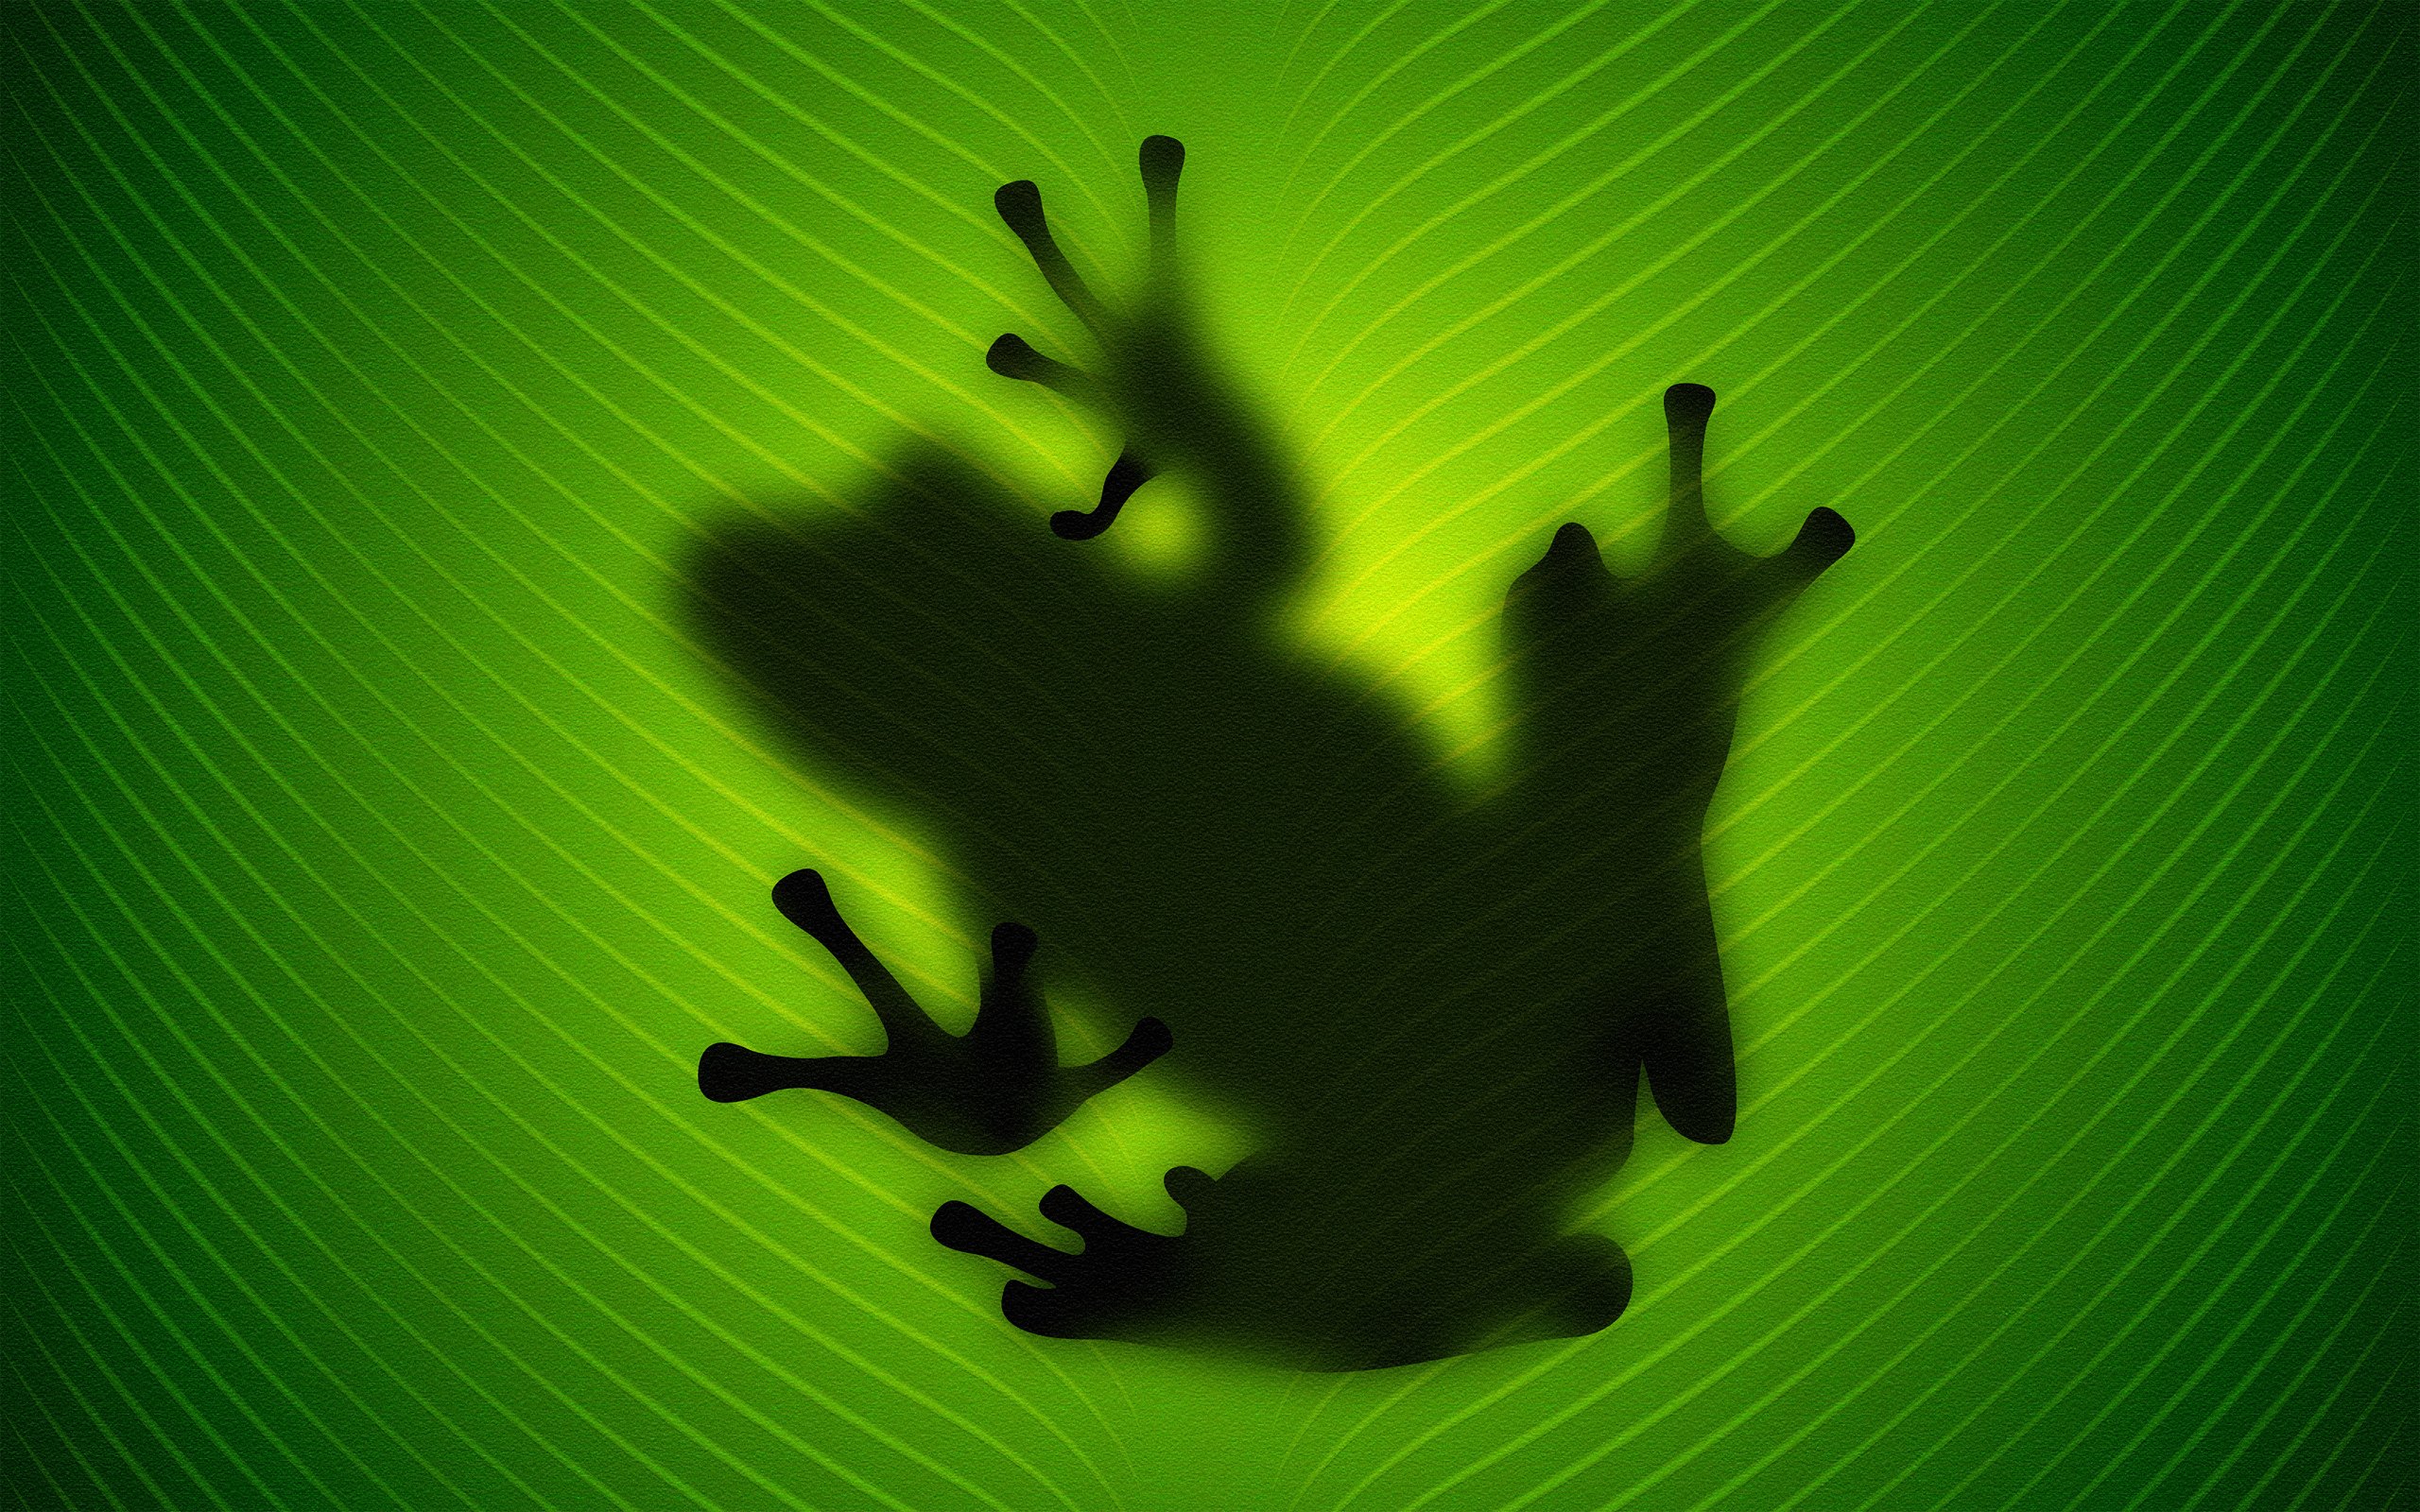 Frog 4K wallpaper for your desktop or mobile screen free and easy to download